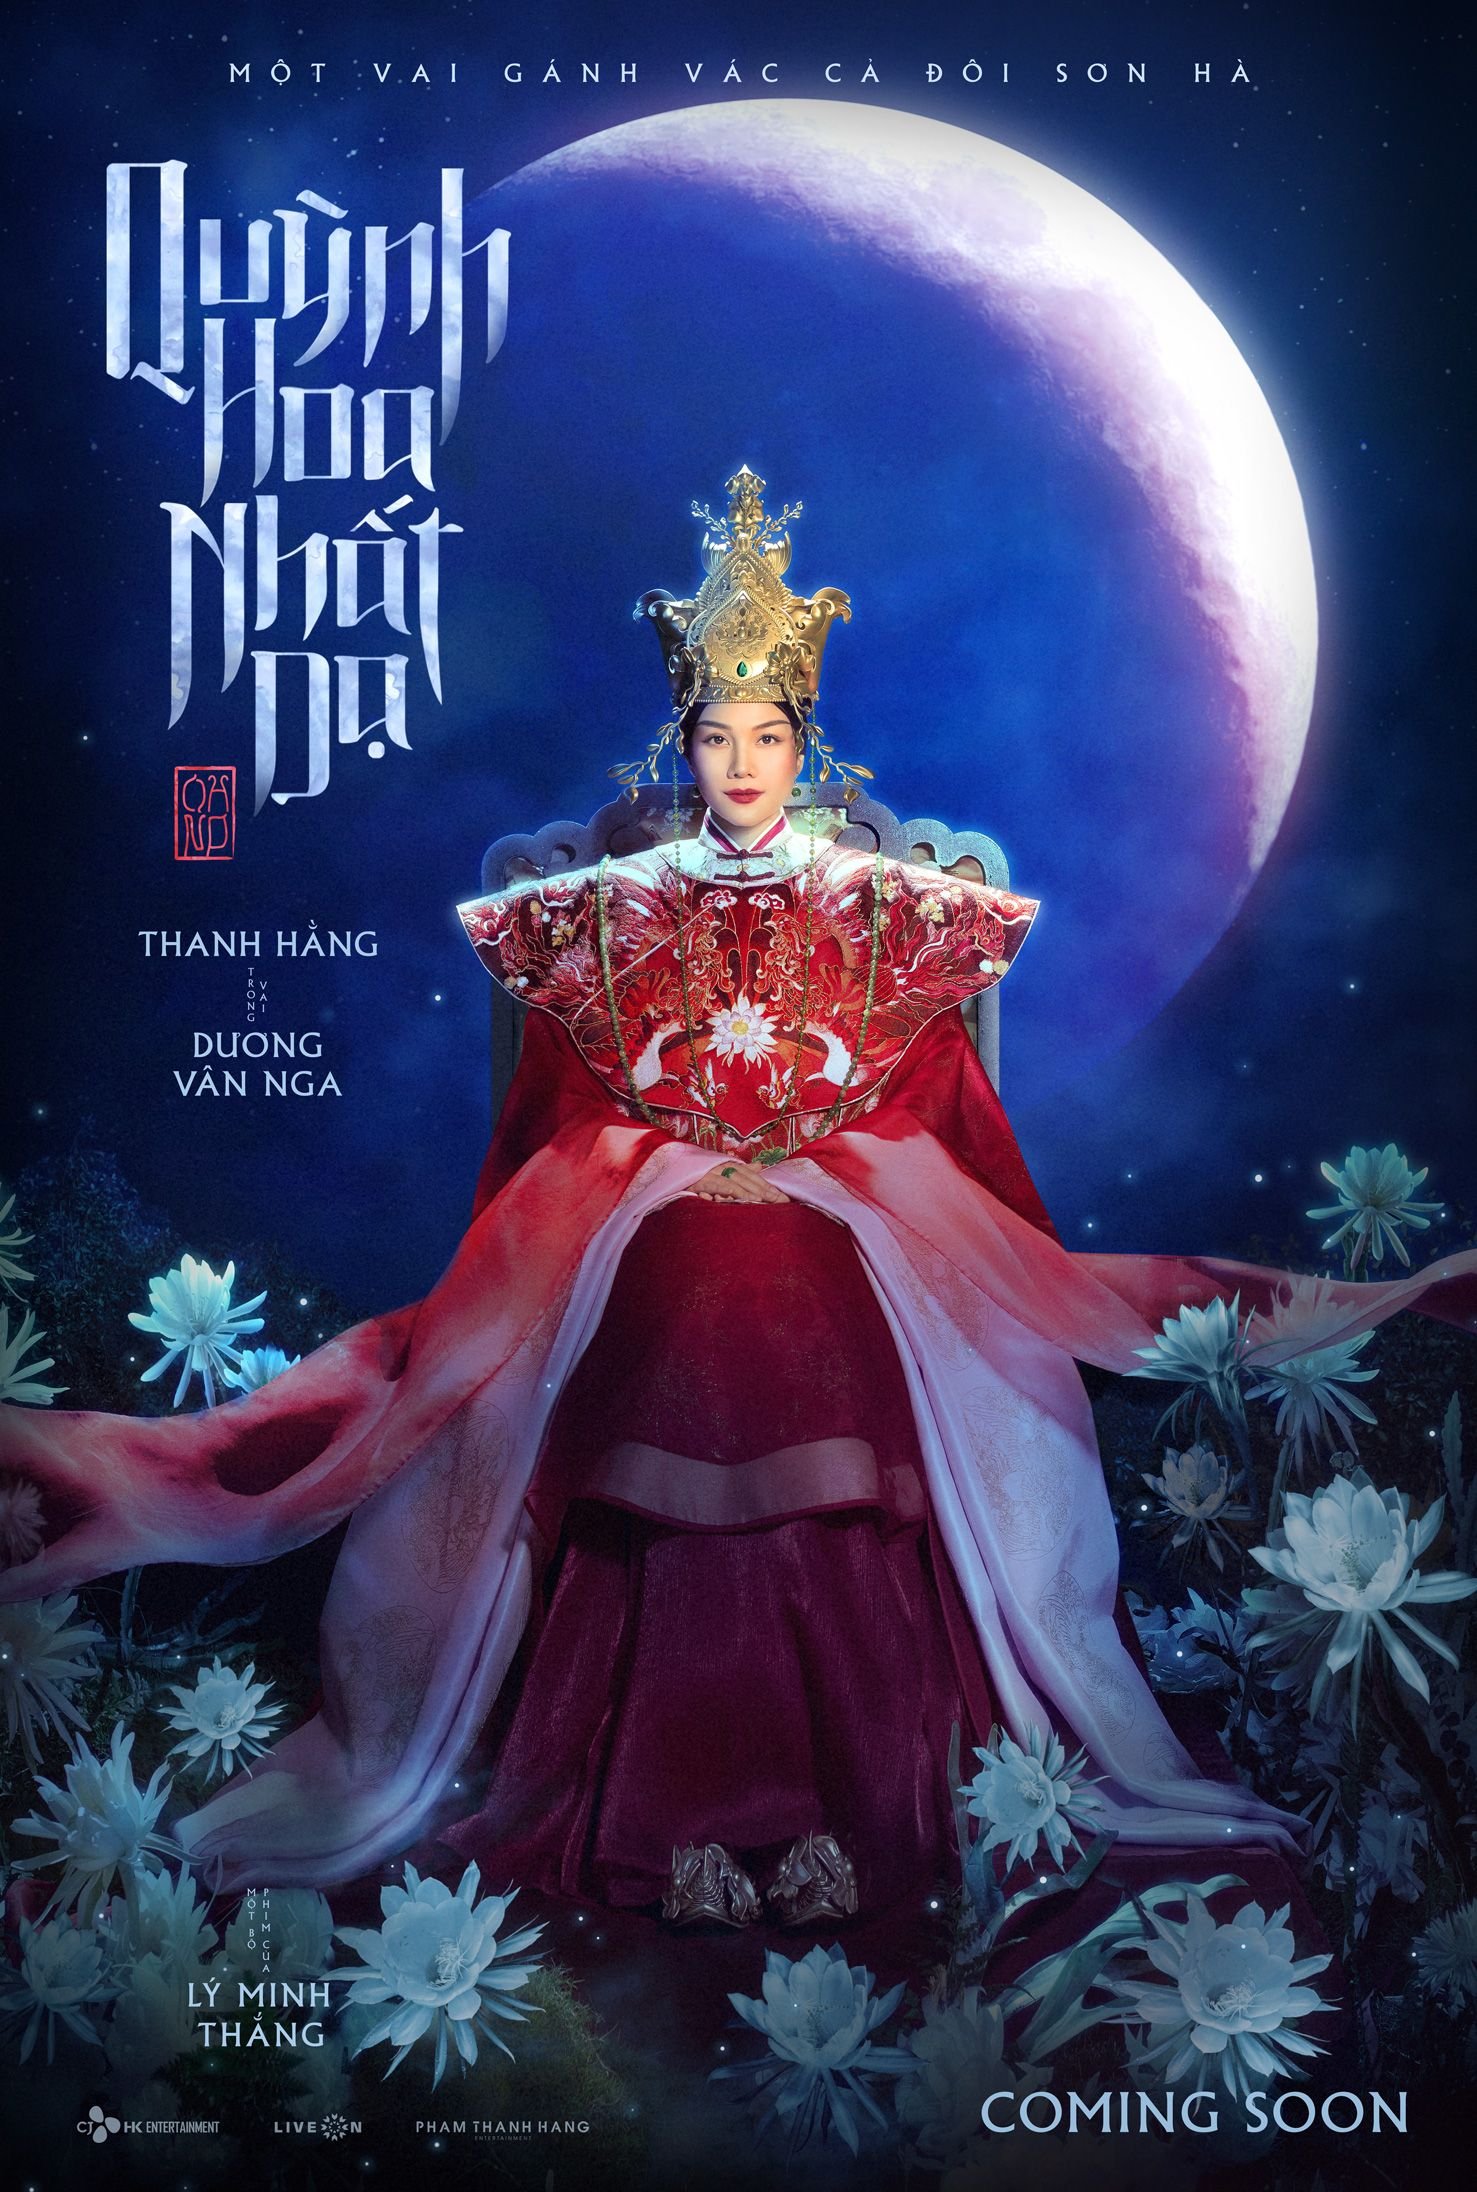 Quynh Hoa Nhat Da: Historical film about Empress Dowager Duong Van Nga produced by Thanh Hang